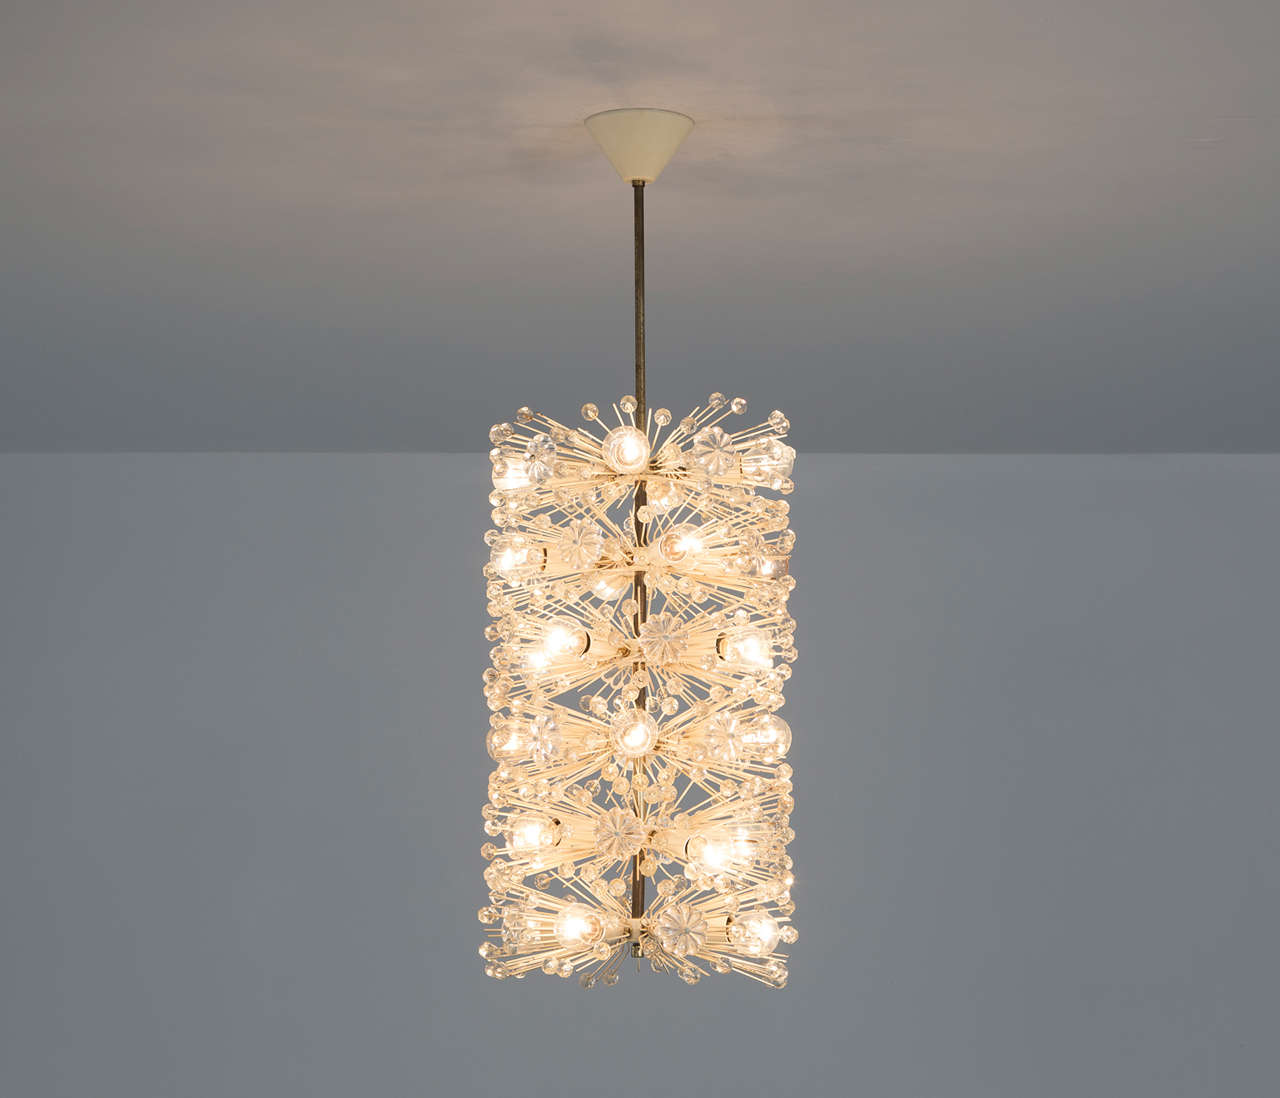 Very rare cylindrical shaped chandelier by Emil Stjenar and made by Rupert E. Nikoll, Austria, 1960s.

The flower shaped glass decorations are an icon for the designs of Stejnar. 

The brass stem is nicely decorated with white lacquered steel